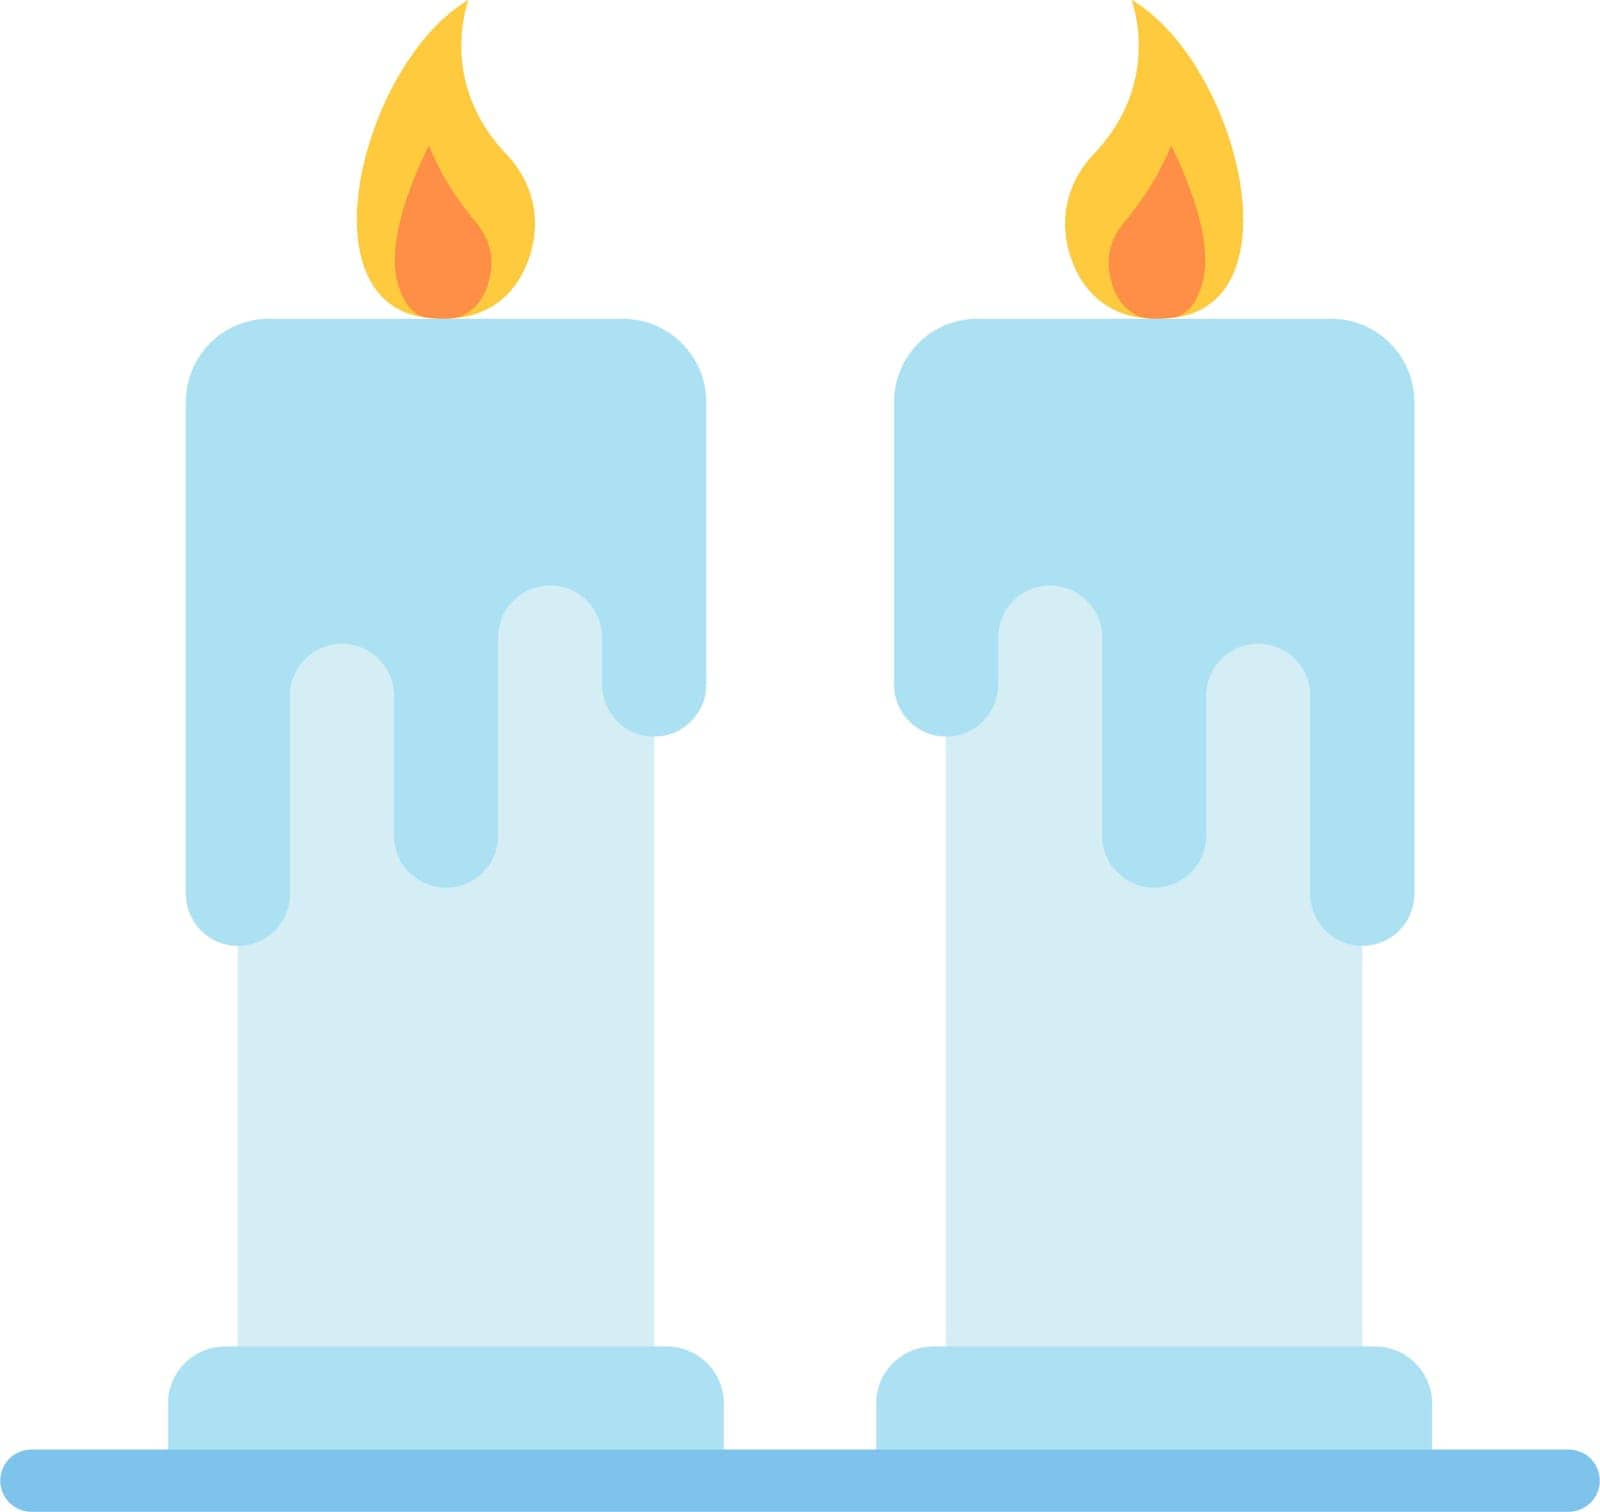 Candles Icon image. Suitable for mobile application.